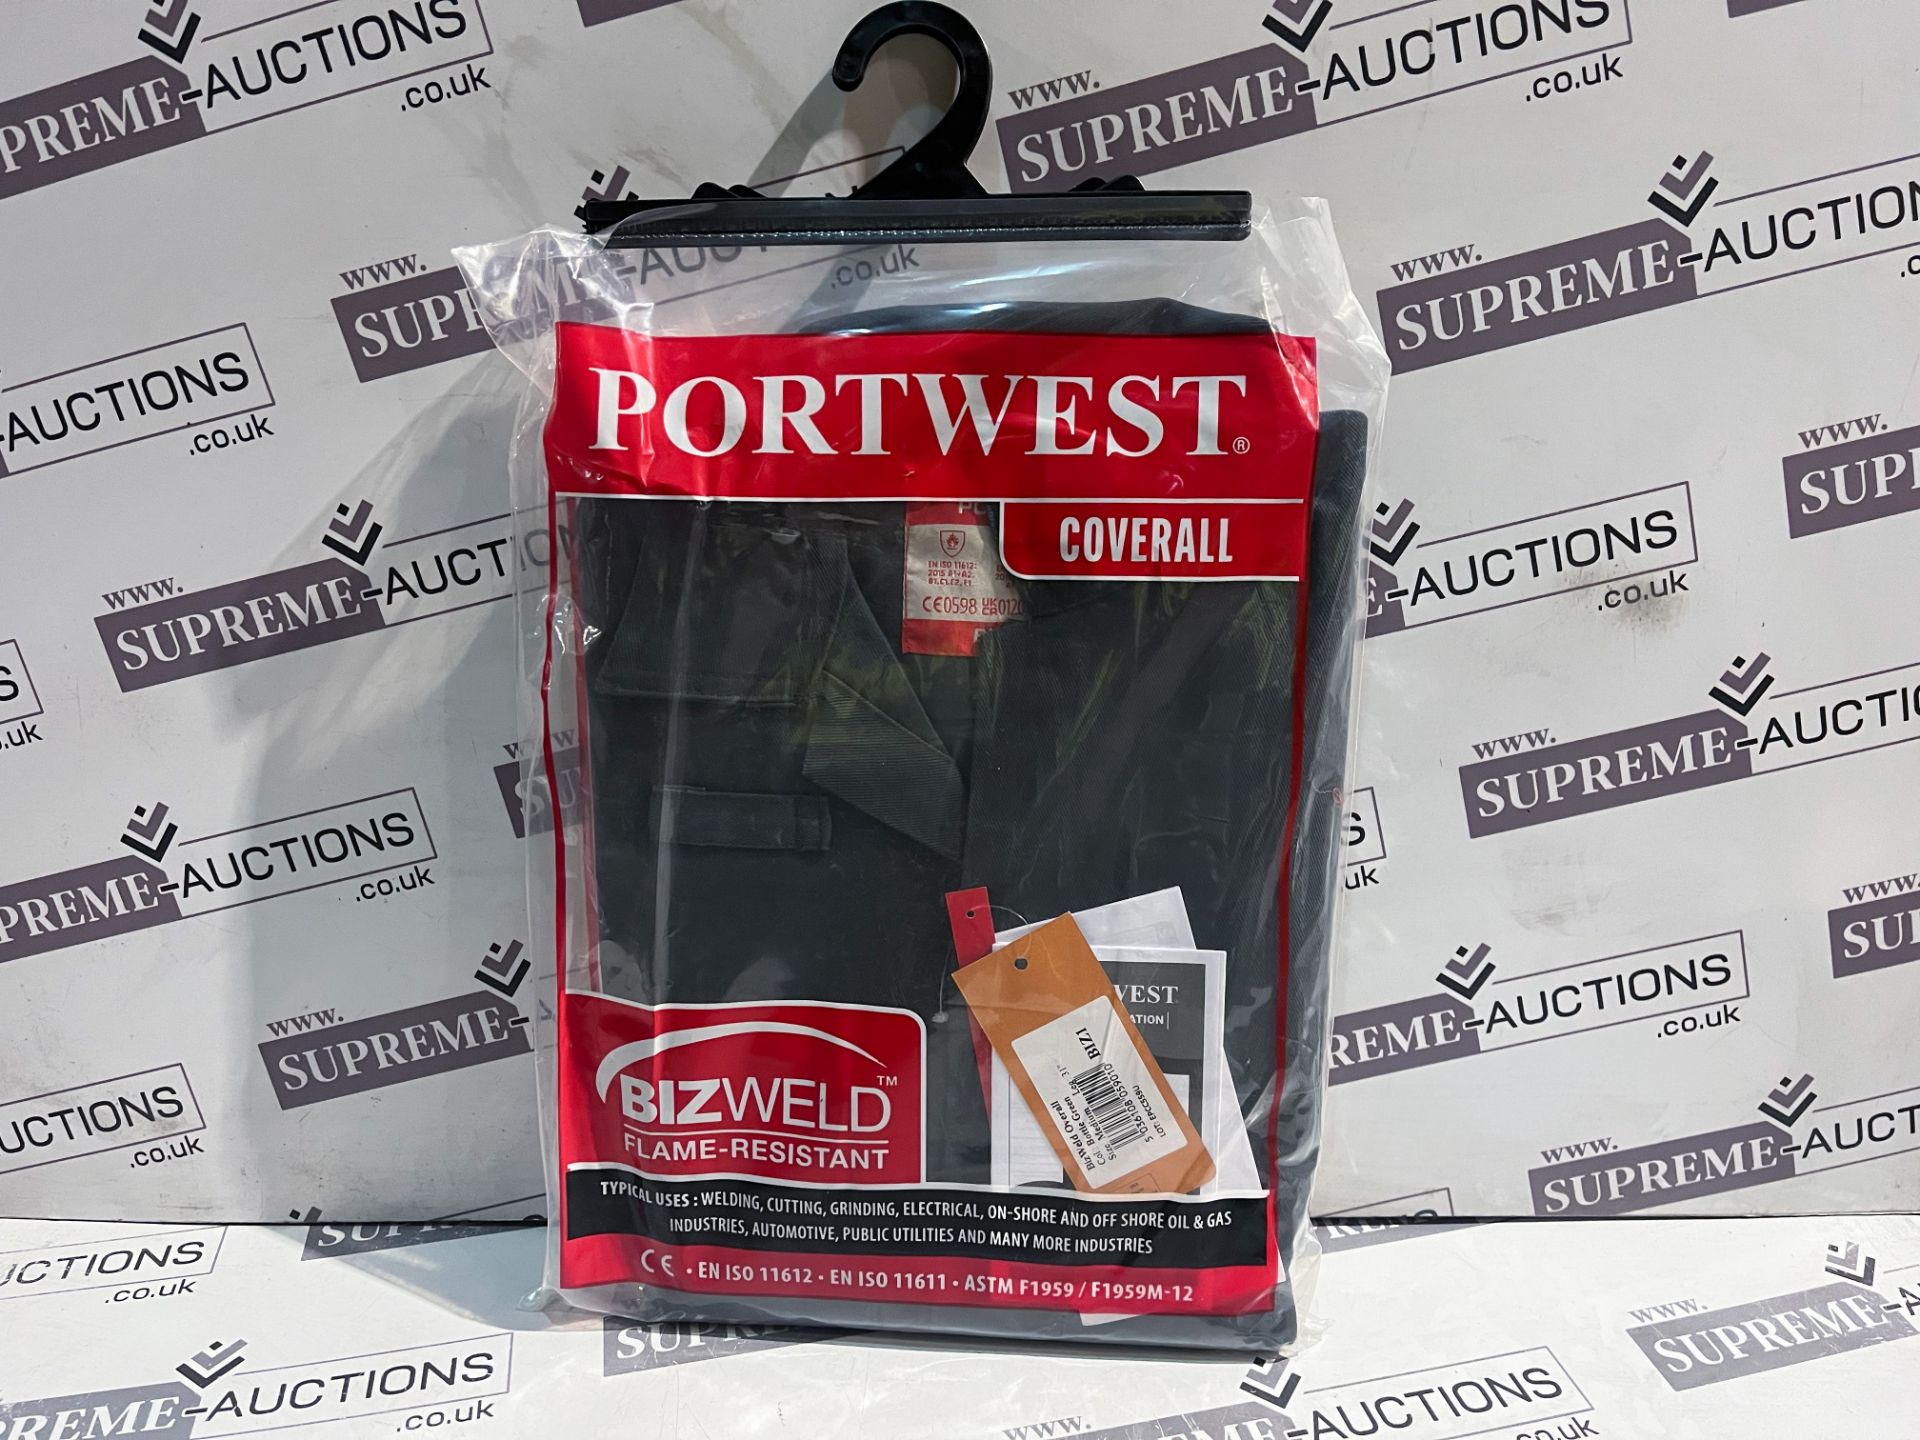 11 X BRAND NEW PORTWEST BIZWELD FLAME RESISTANT COVERALLS SIZE MEDIUM R13-15